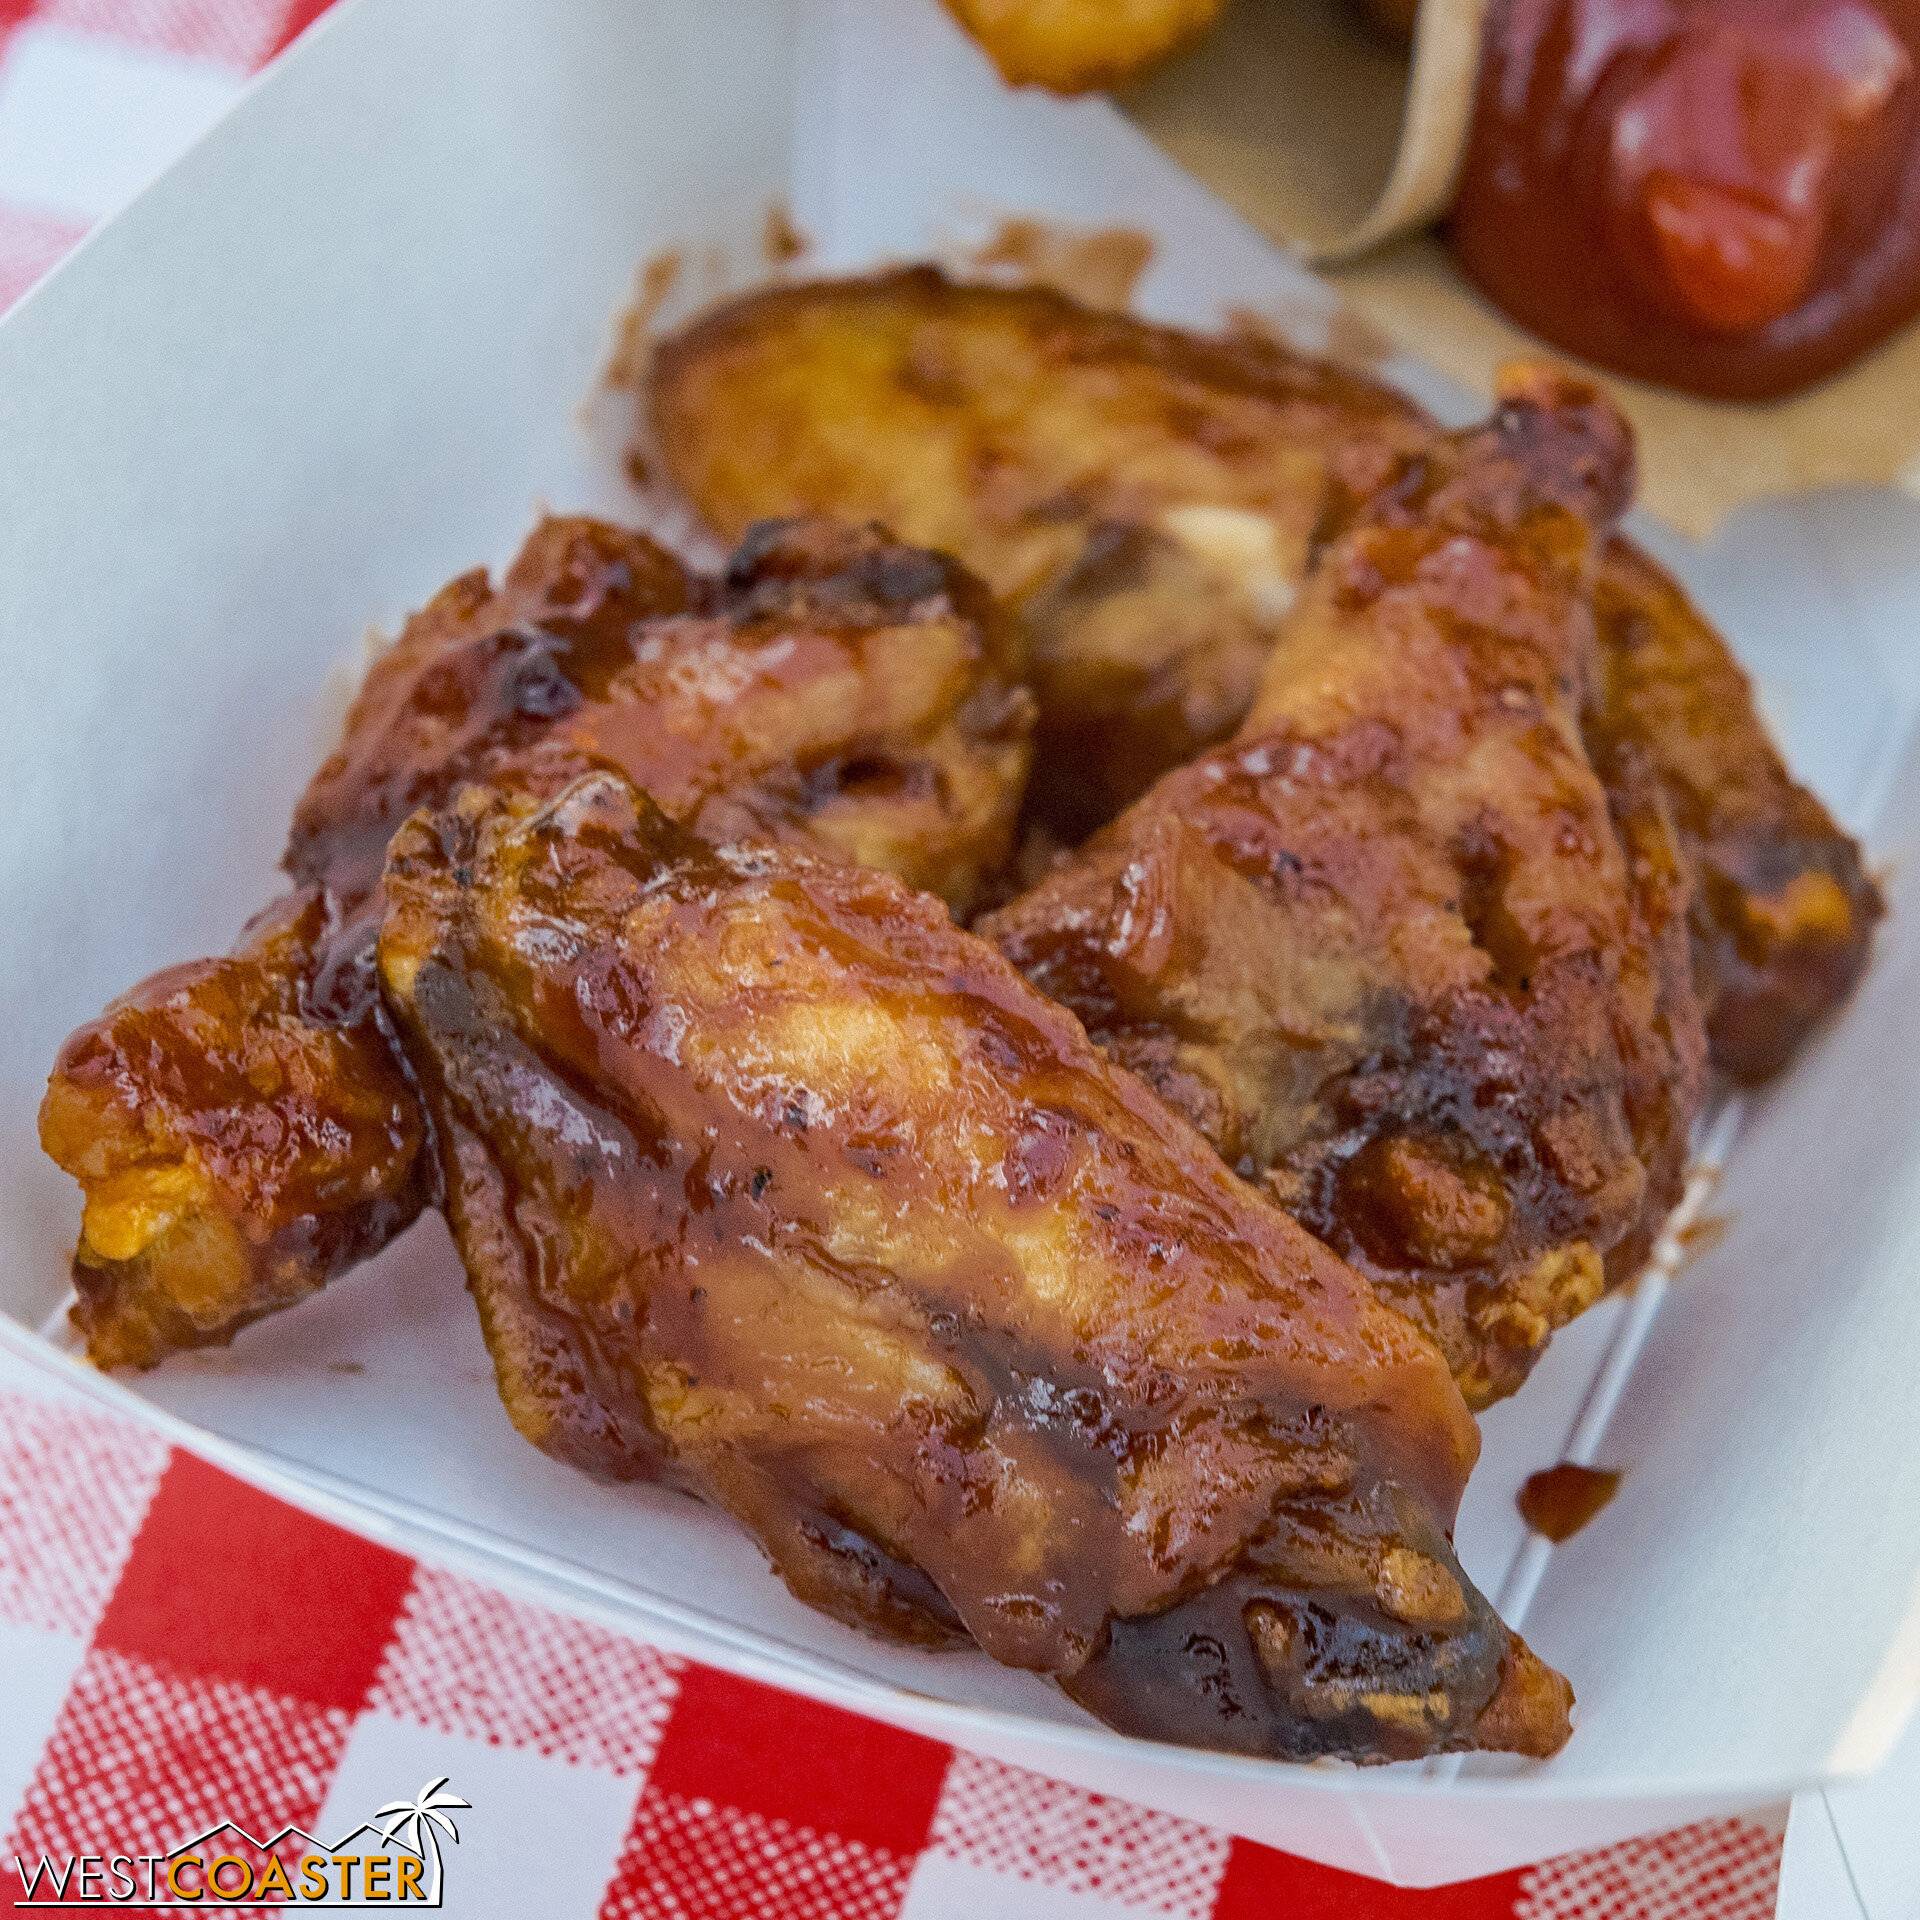  Boysenberry BBQ Wings.   You can’t go wrong with these, except that mine were a little cold when I go them.   